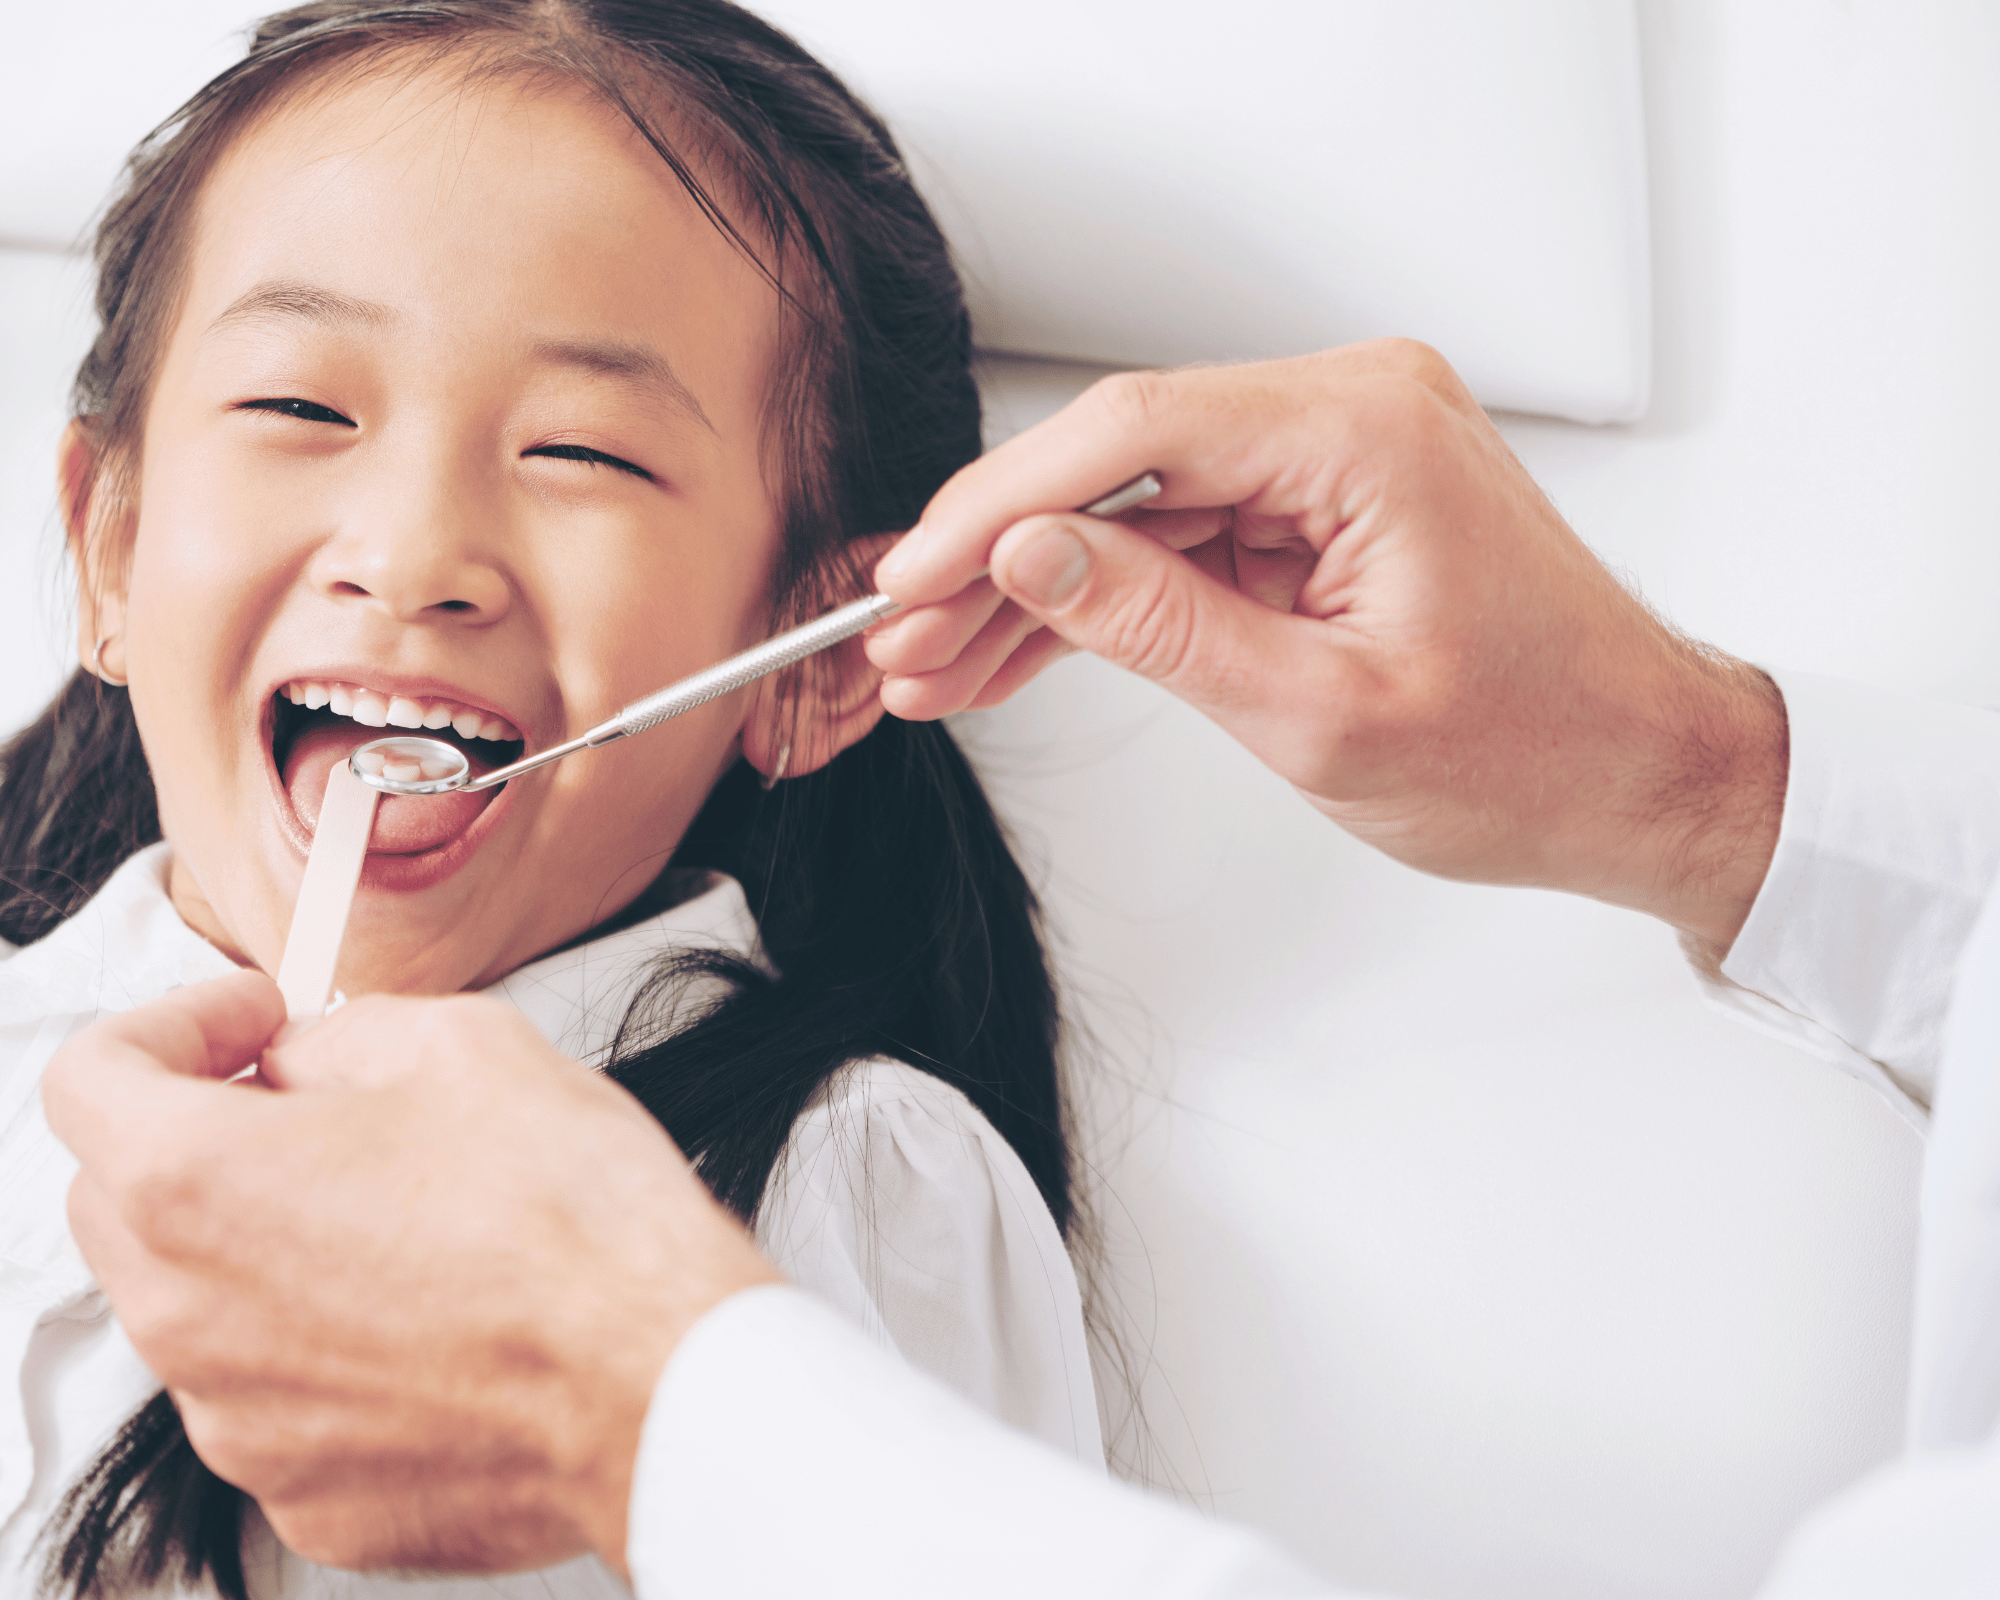 A Parent’s Guide to Manage Child’s Dental Health with Ease